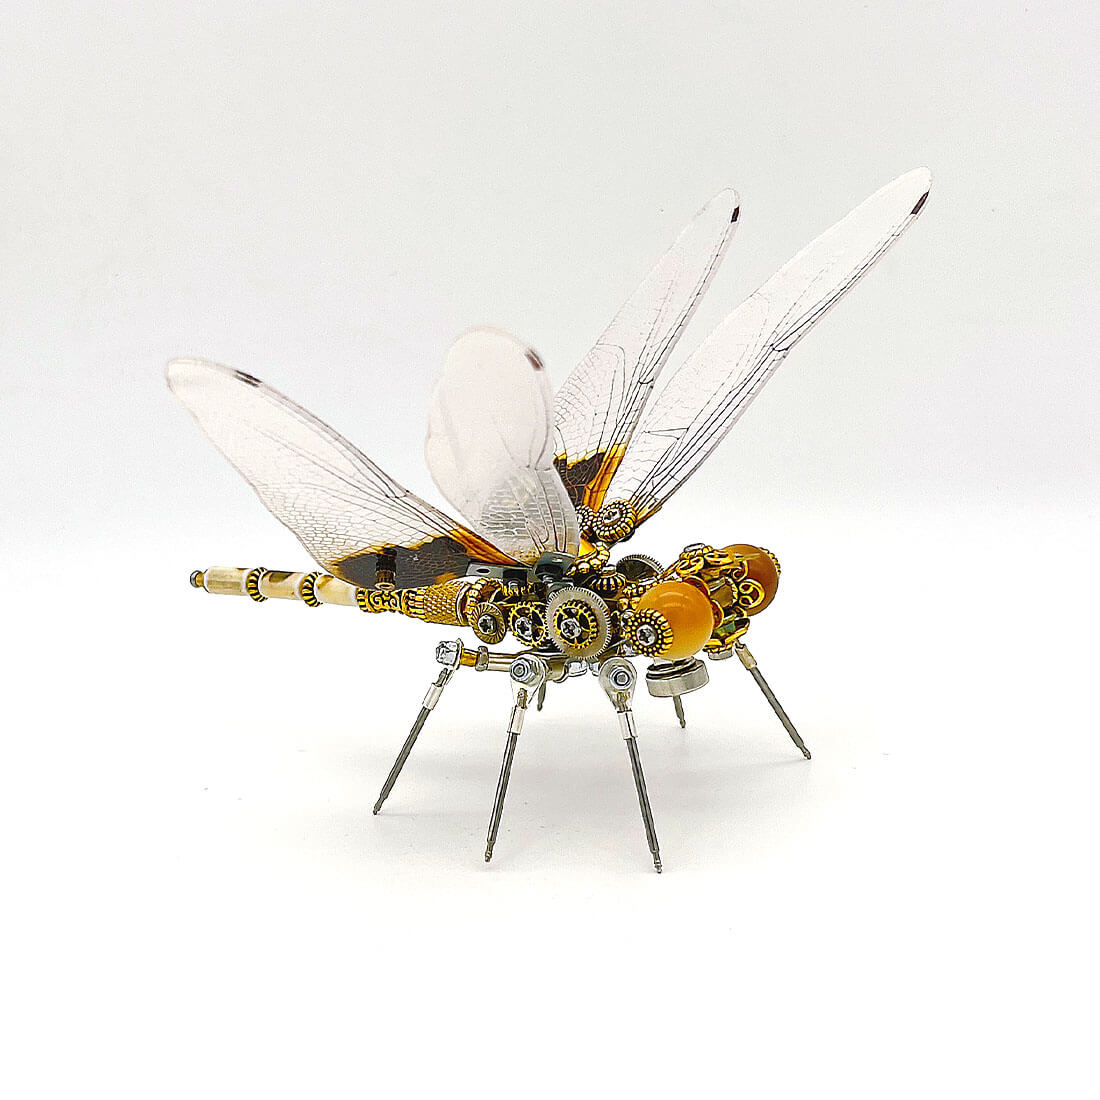 Mechanical Punk Large Dragonfly 3D DIY Insects Model Metal Assembly Toy Creative Ornament (200PCS)